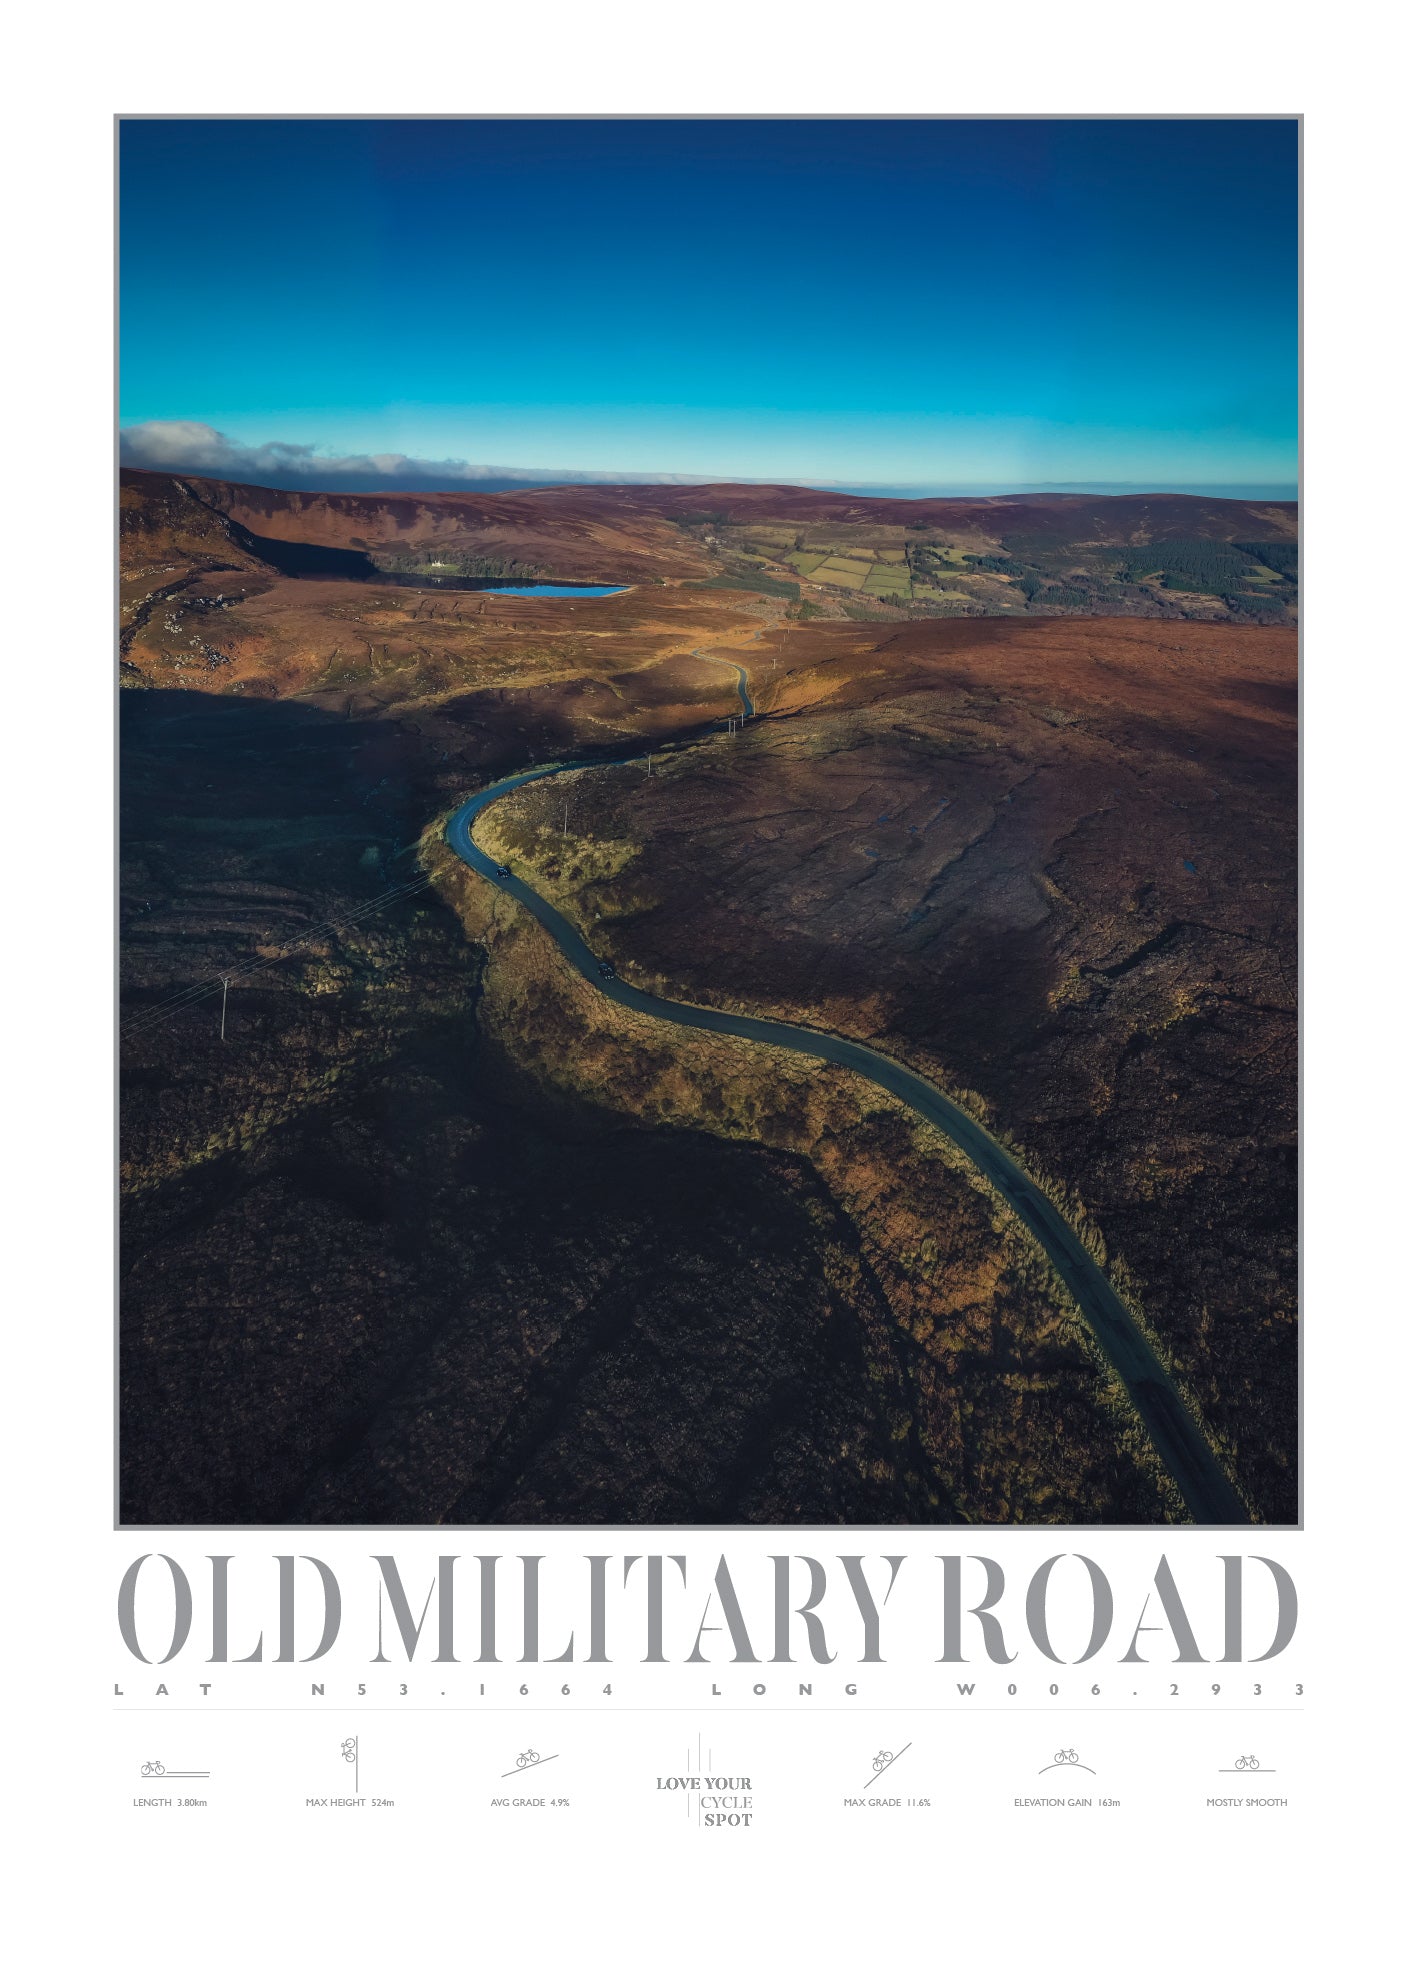 OLD MILITARY ROAD CO DUBLIN